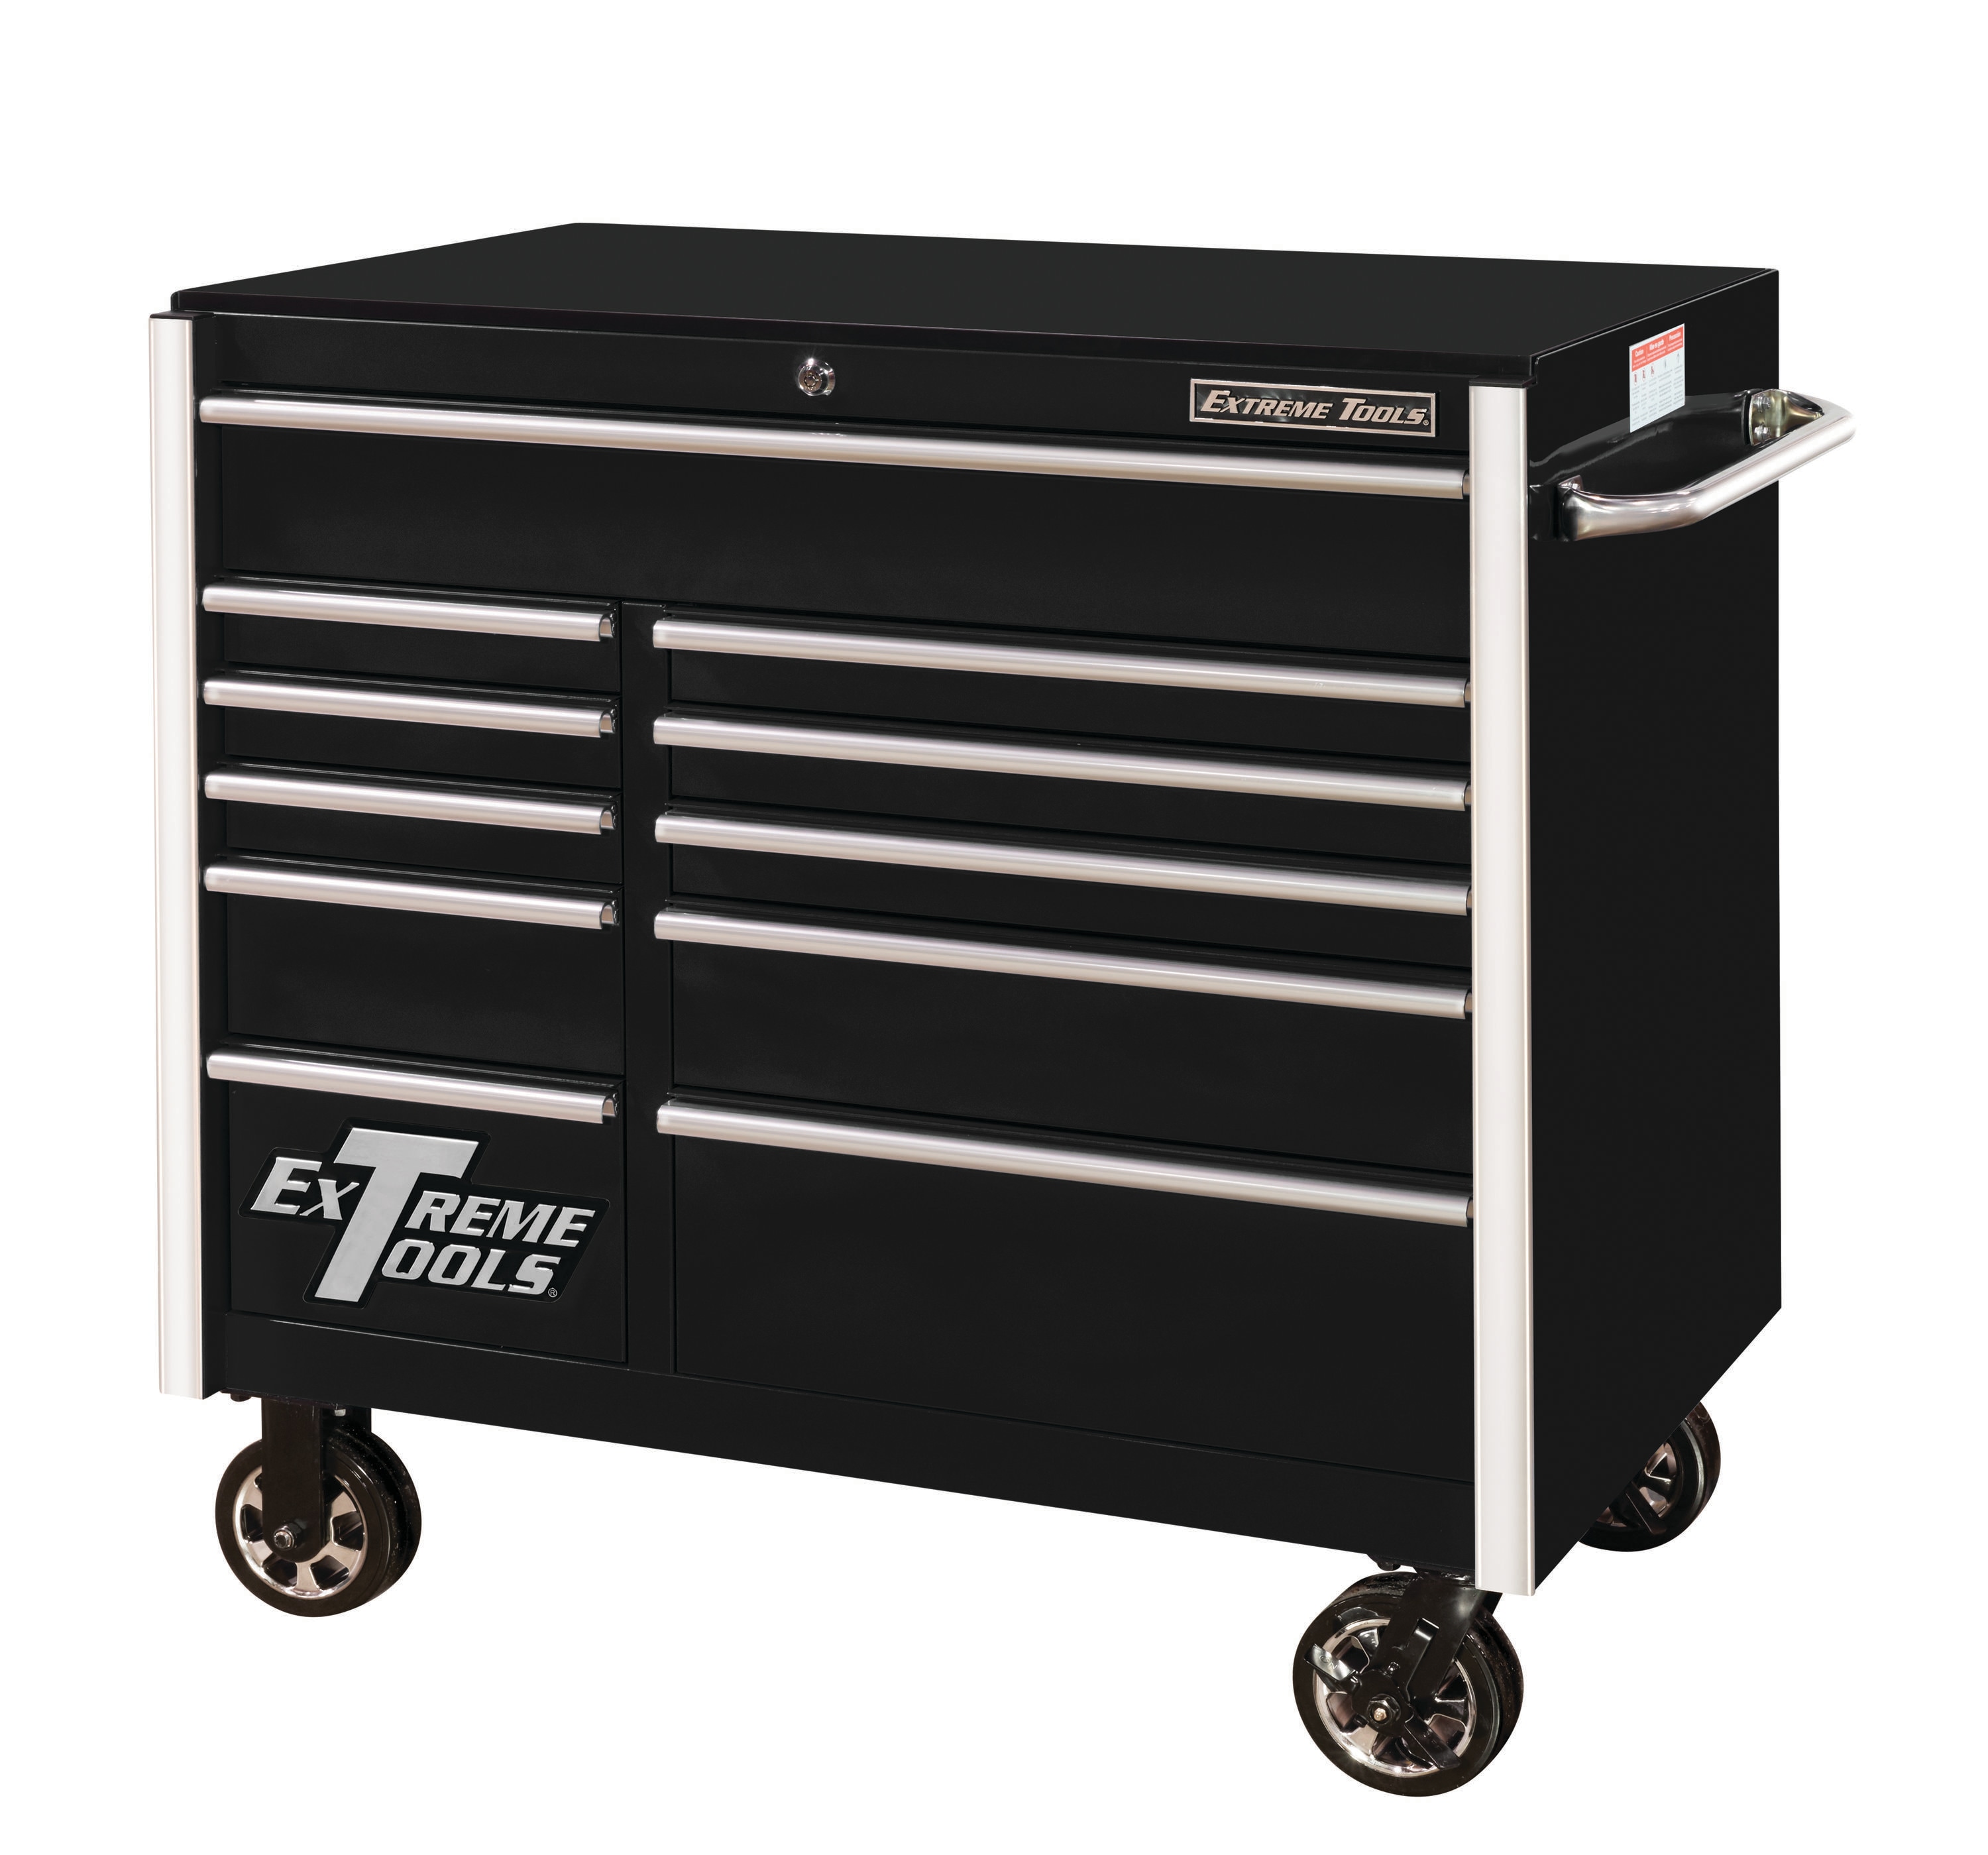 Extreme Tools RX Series 41 in. 11-Drawer Roller Cabinet Tool Chest in Black, Black gloss powder coat finish with anodized aluminum drawer pulls -  RX412511RCBK